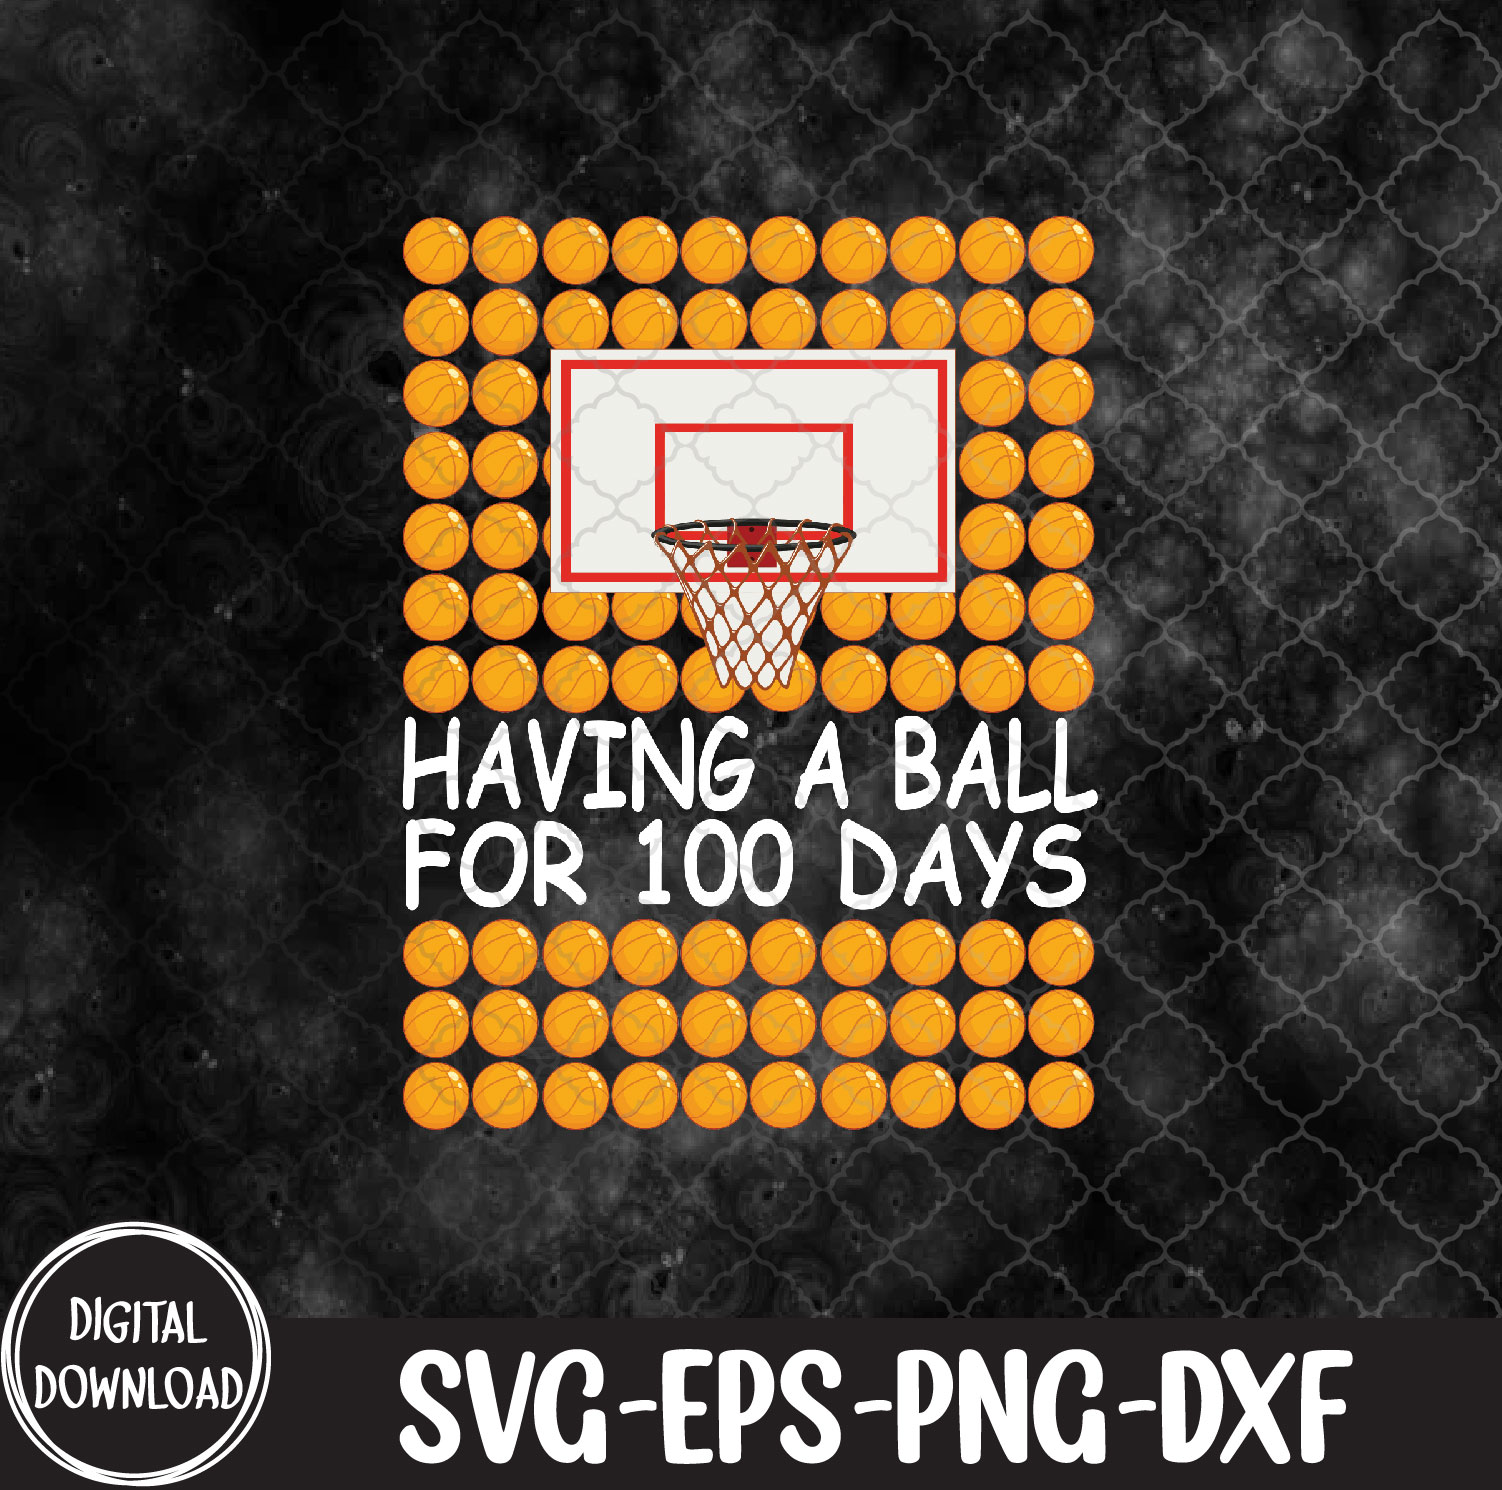 WTMNEW9file 09 28 100 Days Of School Basketball 100th Day Balls-, Svg, Eps, Png, Dxf